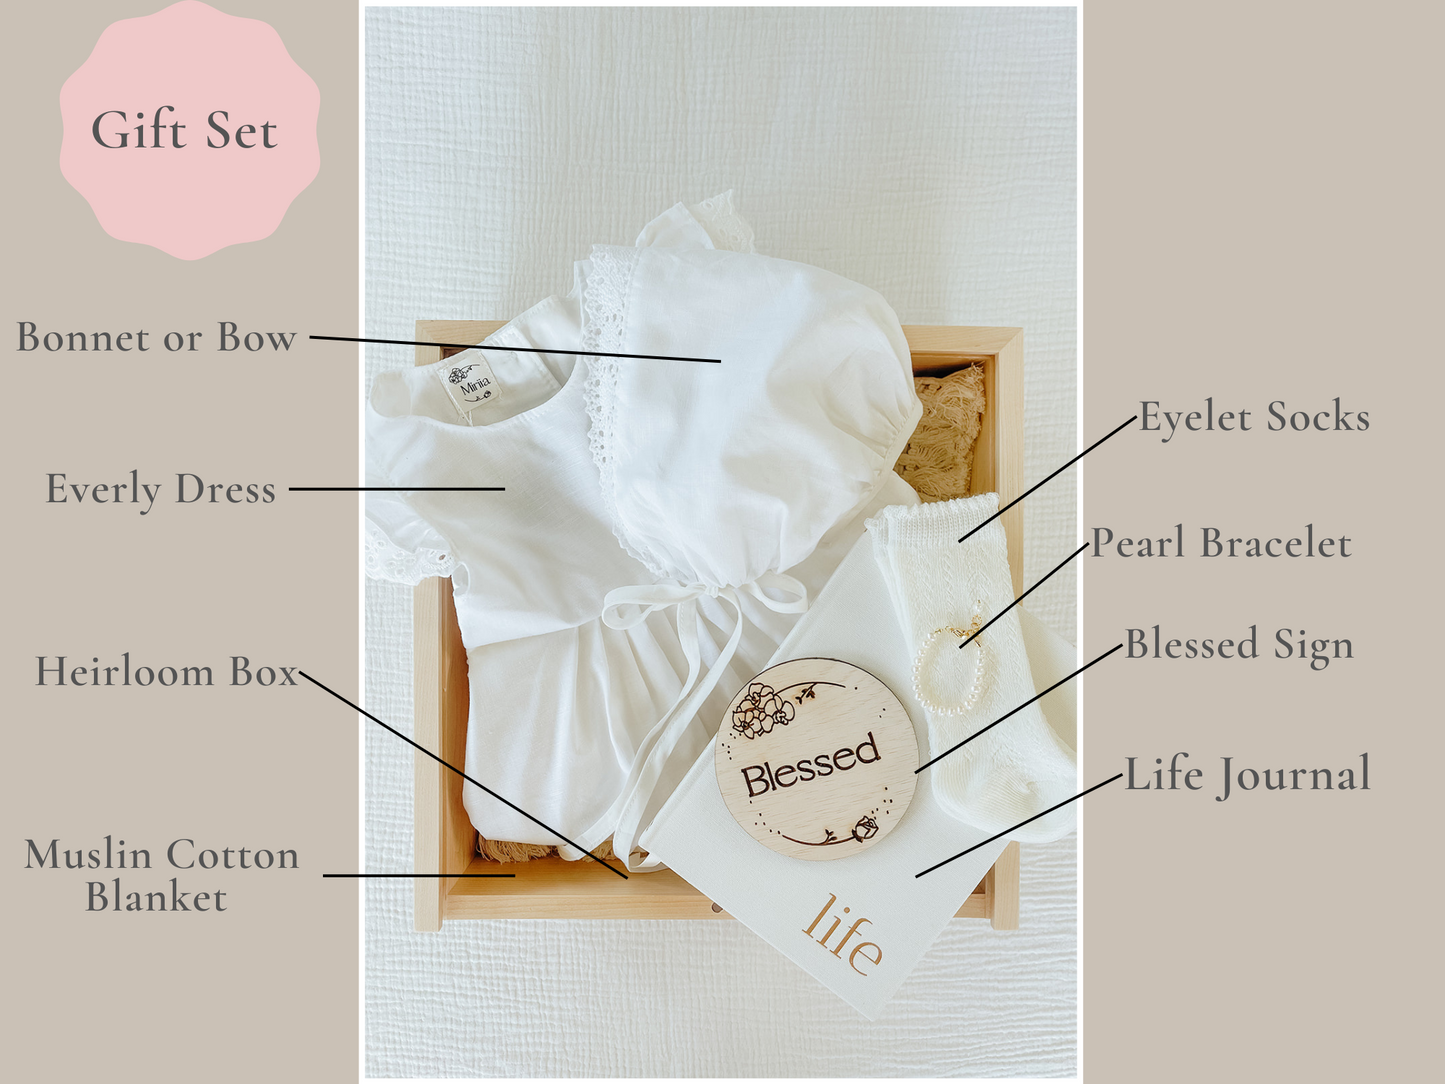 Everly Wooden Box Gift Set